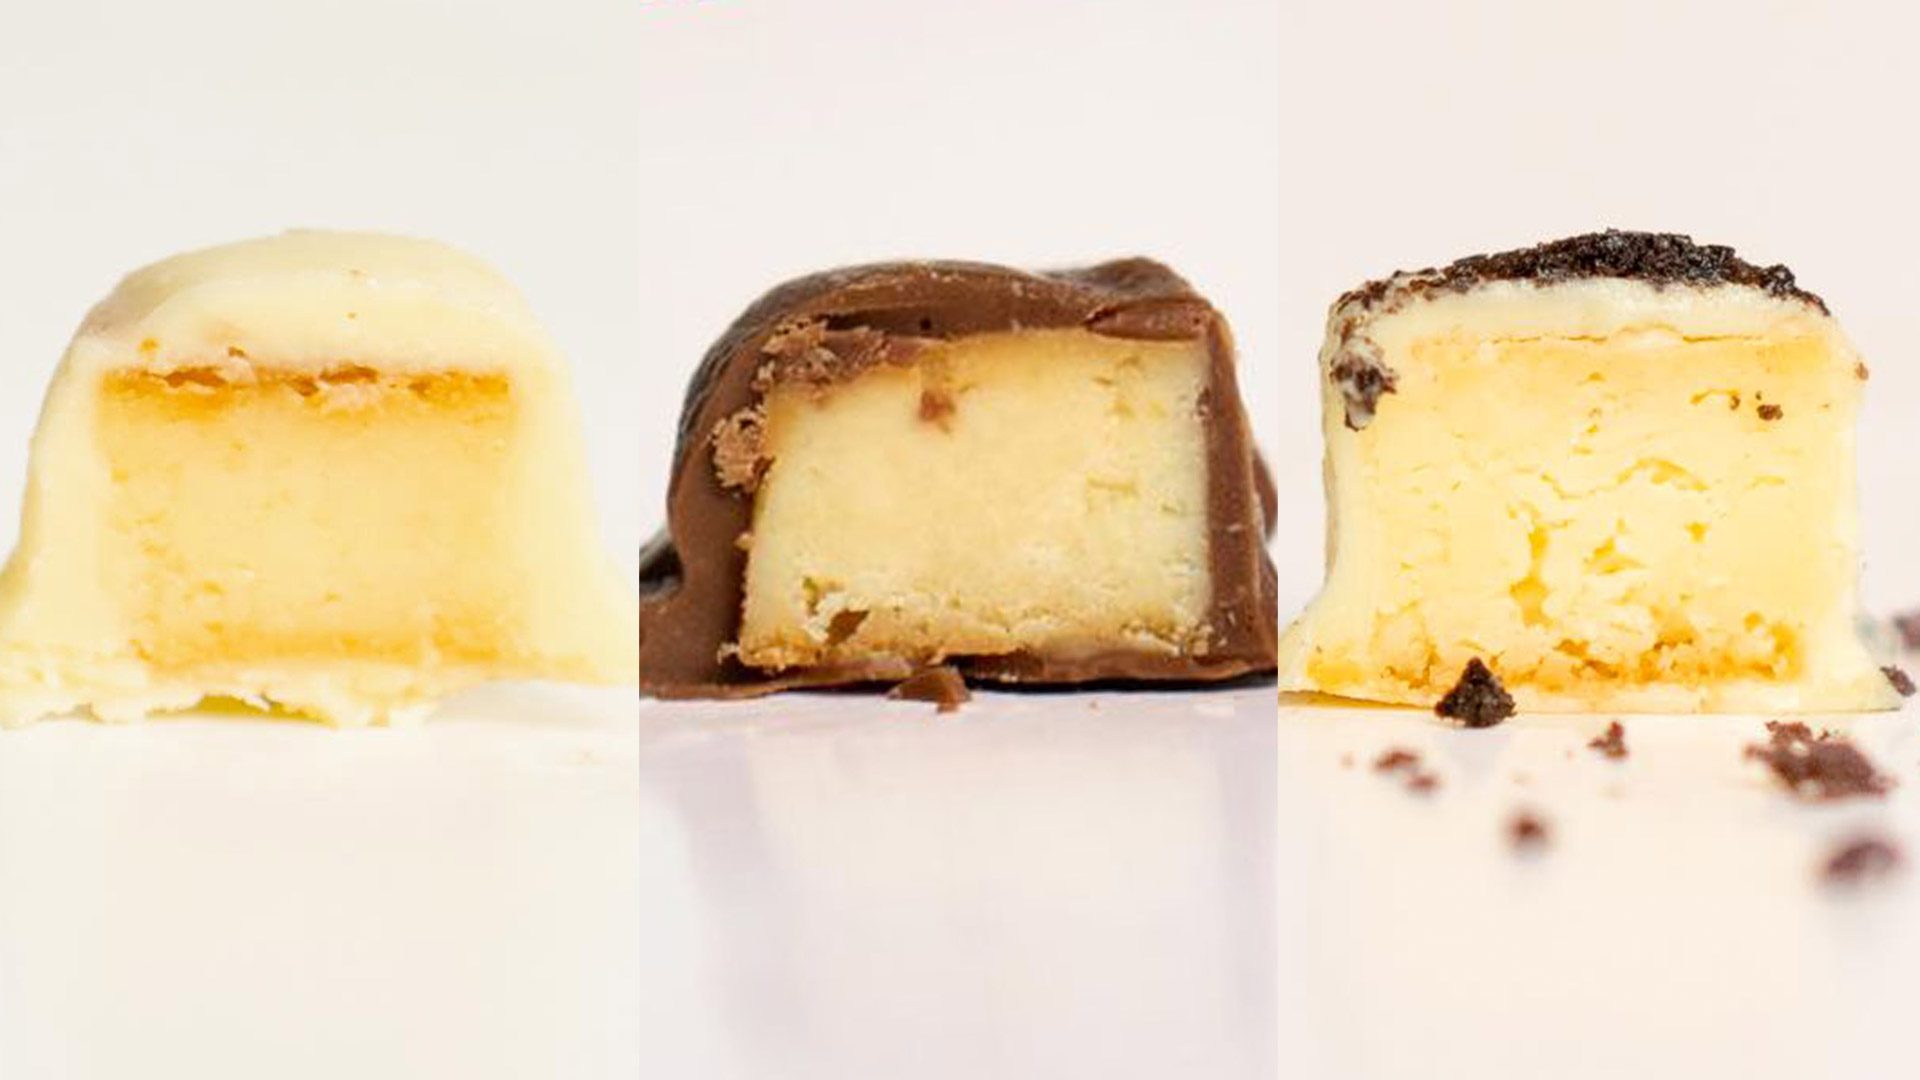 LOOK: These homemade cheesecake bites by this Manila bakery come in 3 flavors